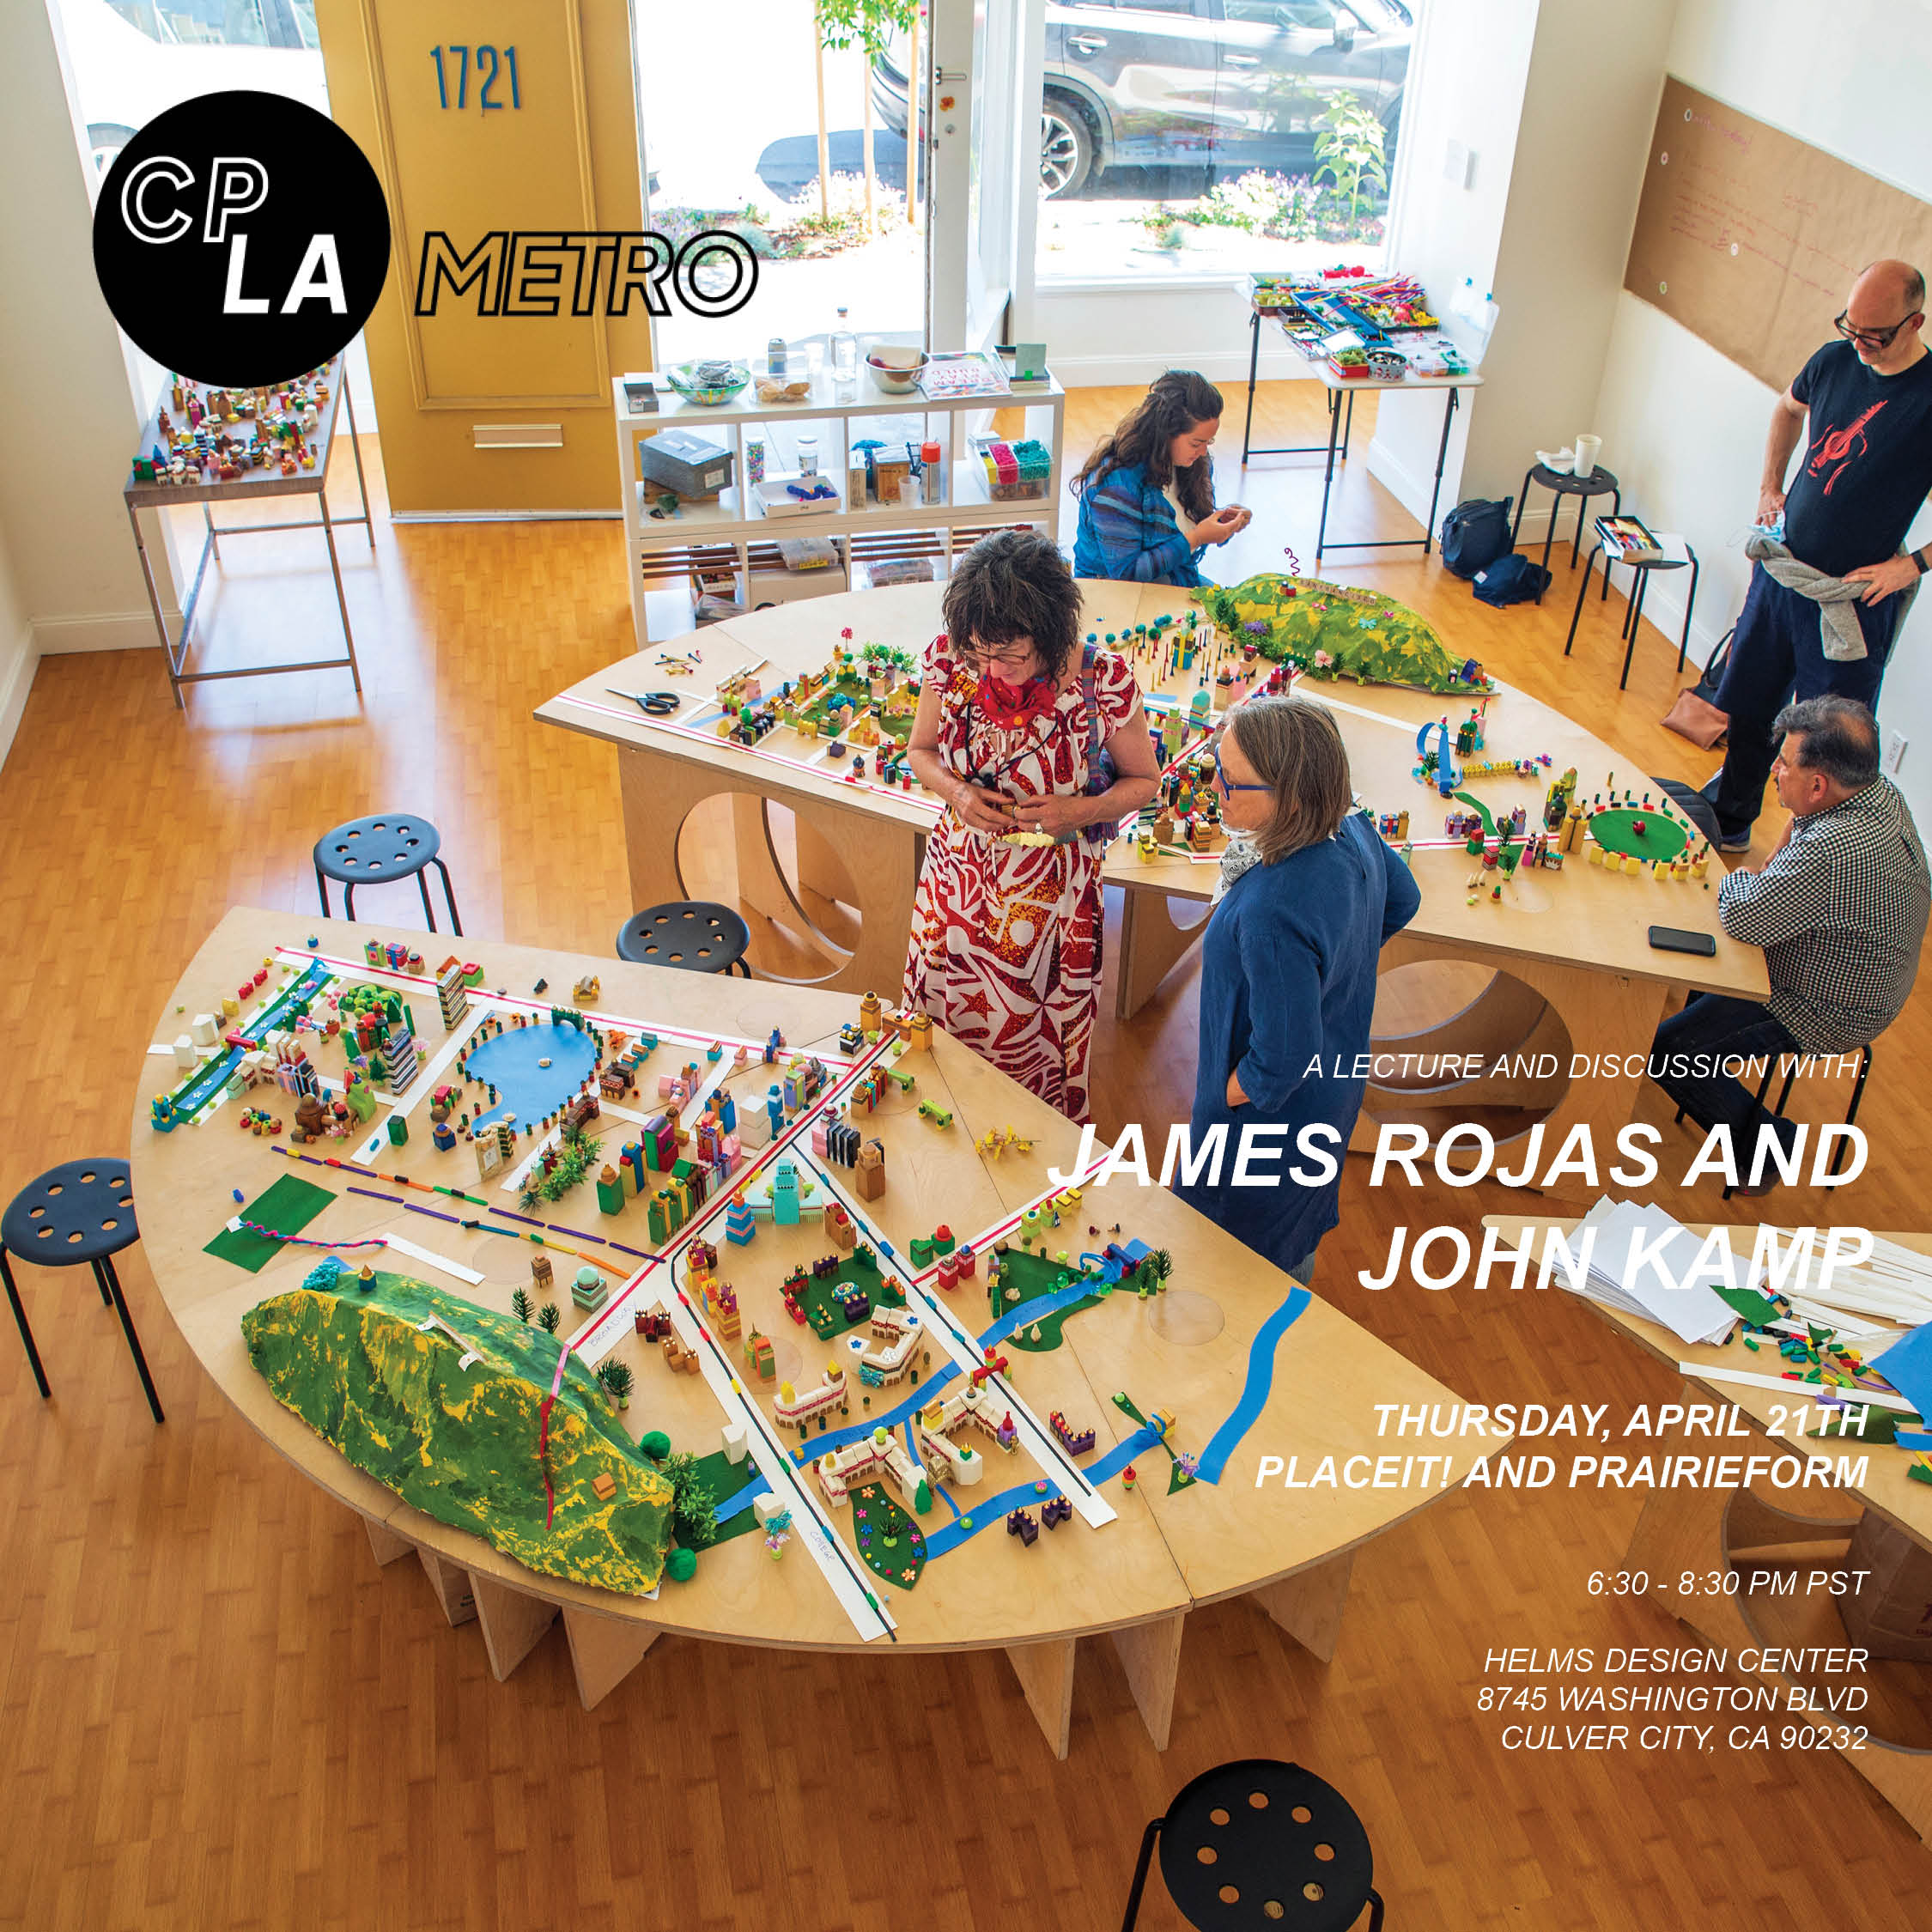 John Kamp of Prairieform and James Rojas of Place It! will be leading a talk and workshop on Dream Play Build at the Helms Bakery District as part of the Cal-Poly Metro's ongoing lecture series.